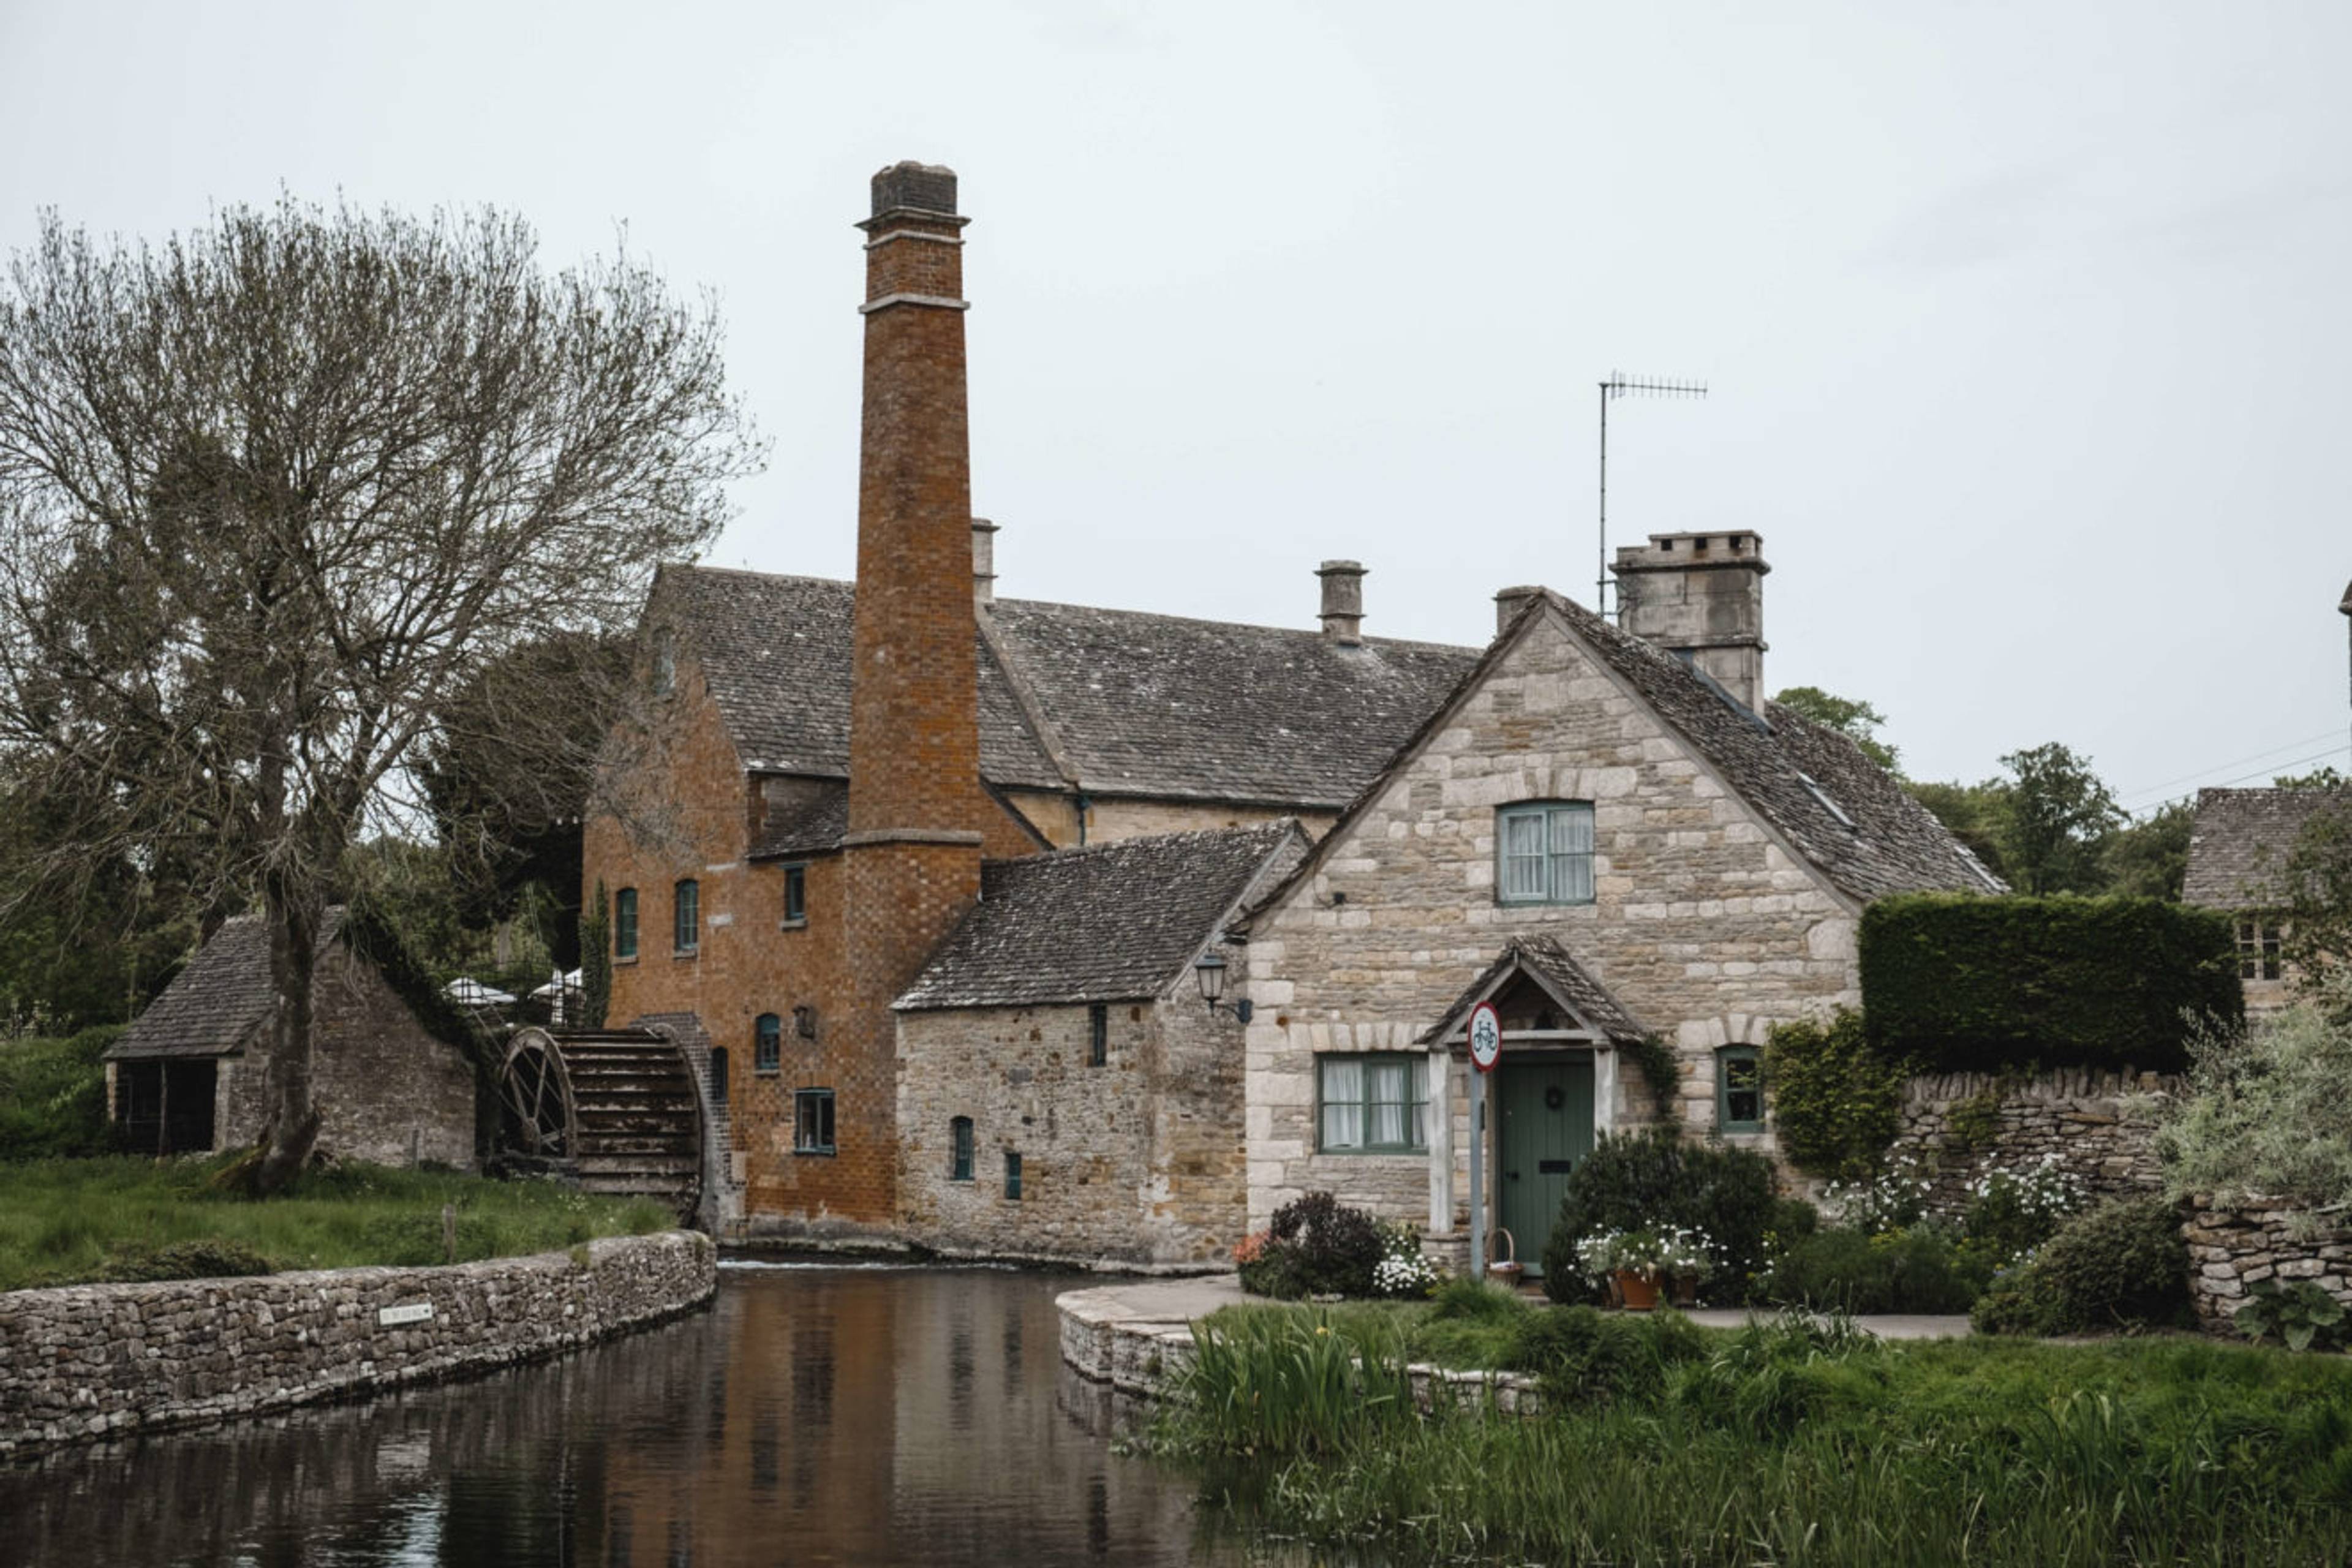 Lower Slaughter Museum